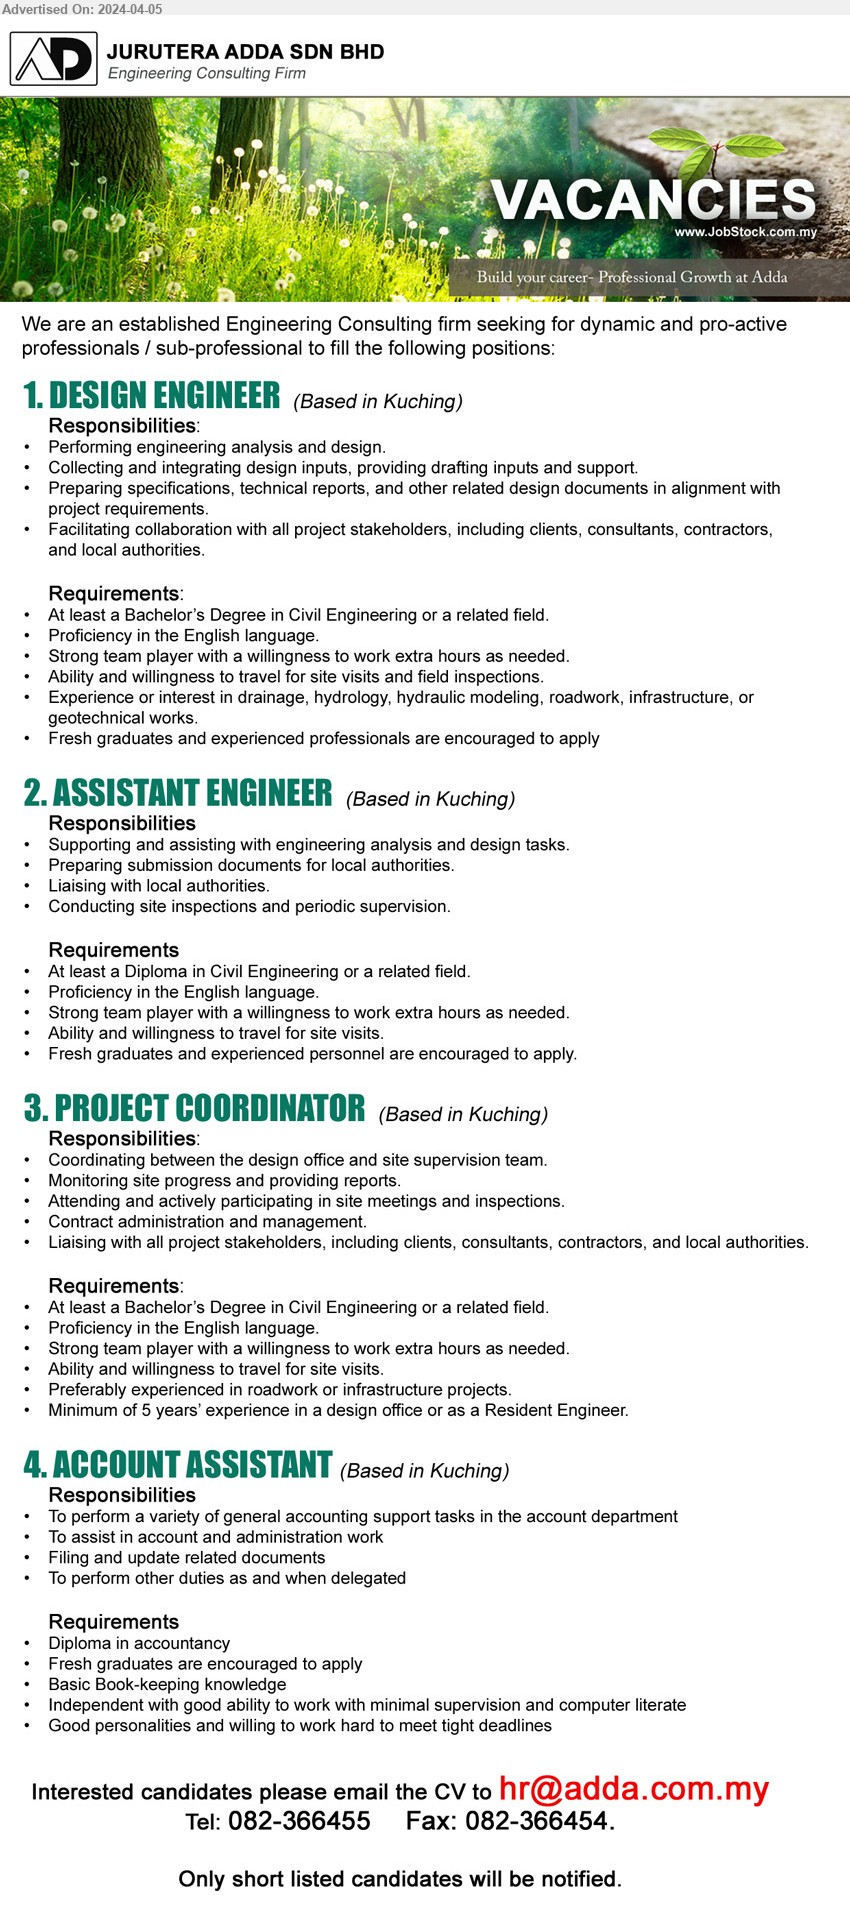 JURUTERA ADDA SDN BHD - 1. DESIGN ENGINEER (Kuching), Bachelor’s Degree in Civil Engineering, Proficiency in the English language.,...
2. ASSISTANT ENGINEER (Kuching), Diploma in Civil Engineering, Proficiency in the English language.,...
3. PROJECT COORDINATOR (Kuching), Bachelor’s Degree in Civil Engineering, 5 yrs. exp.,...
4. ACCOUNT ASSISTANT  (Kuching), Diploma in Accountancy, Fresh graduates are encouraged to apply,...
Call 082-366455  / Email resume to ...
